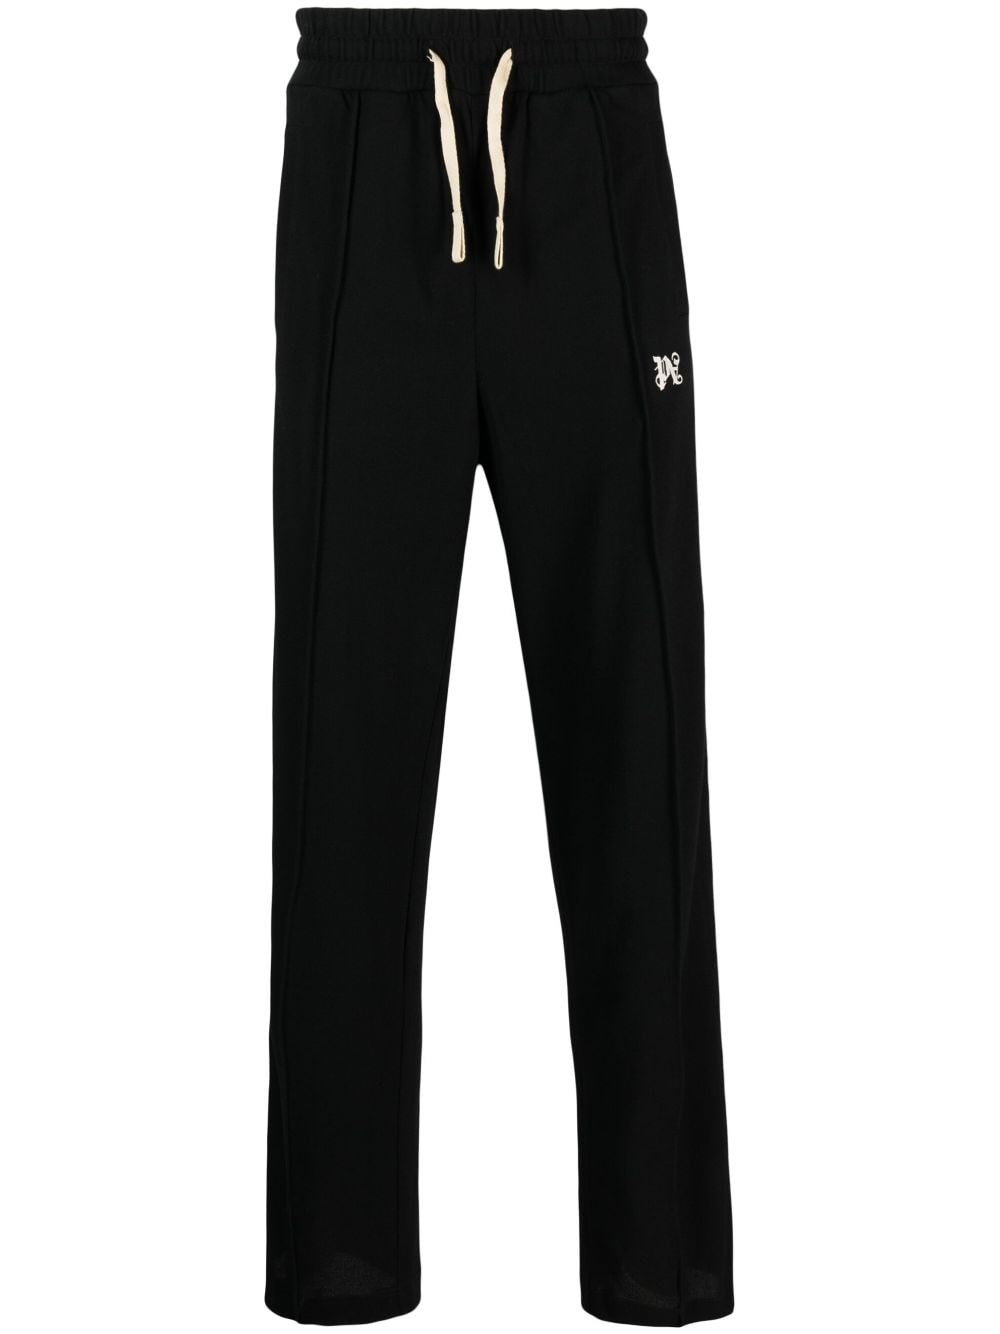 palm angels `pa monogram` piquet track pants available on